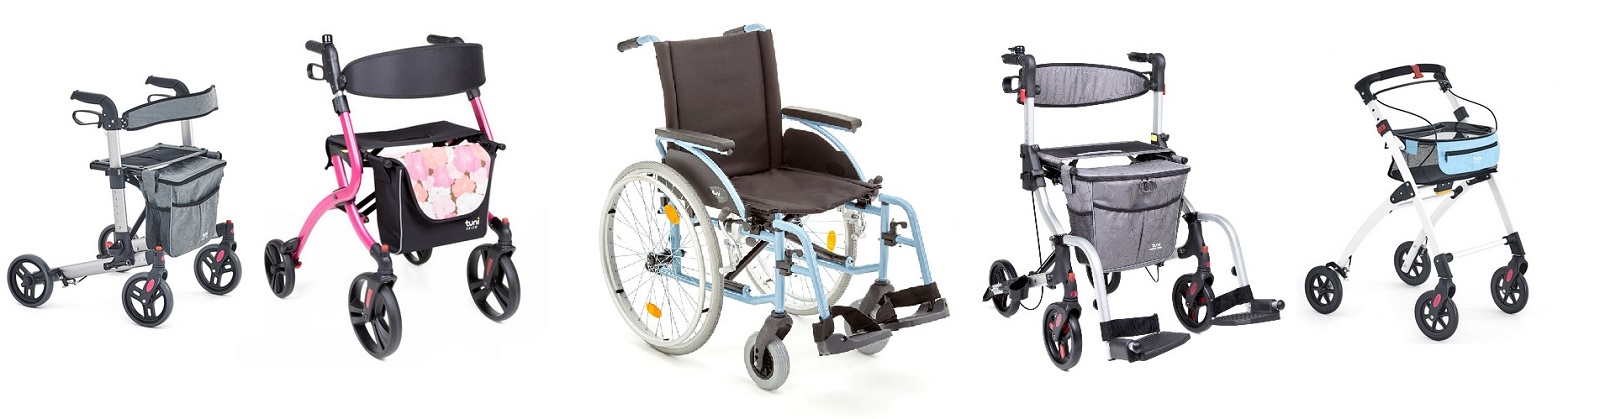 Abilize mobility products